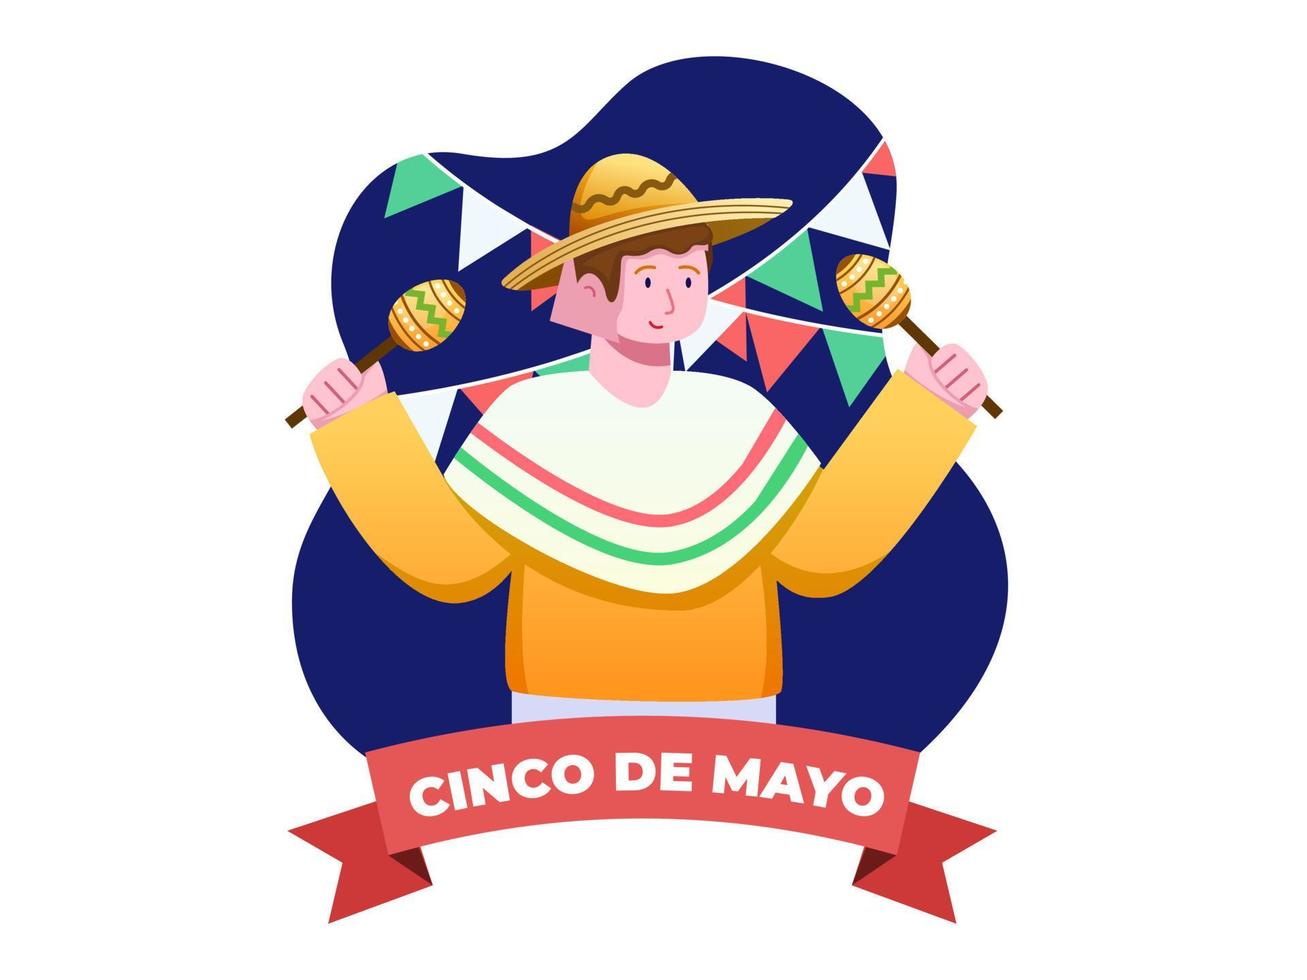 People are happy Celebrating Cinco de Mayo Mexico Festival with use maracas a sombrero. Happy Cinco De Mayo. Can be used for greeting card, poster, postcard, print, banner, etc, vector